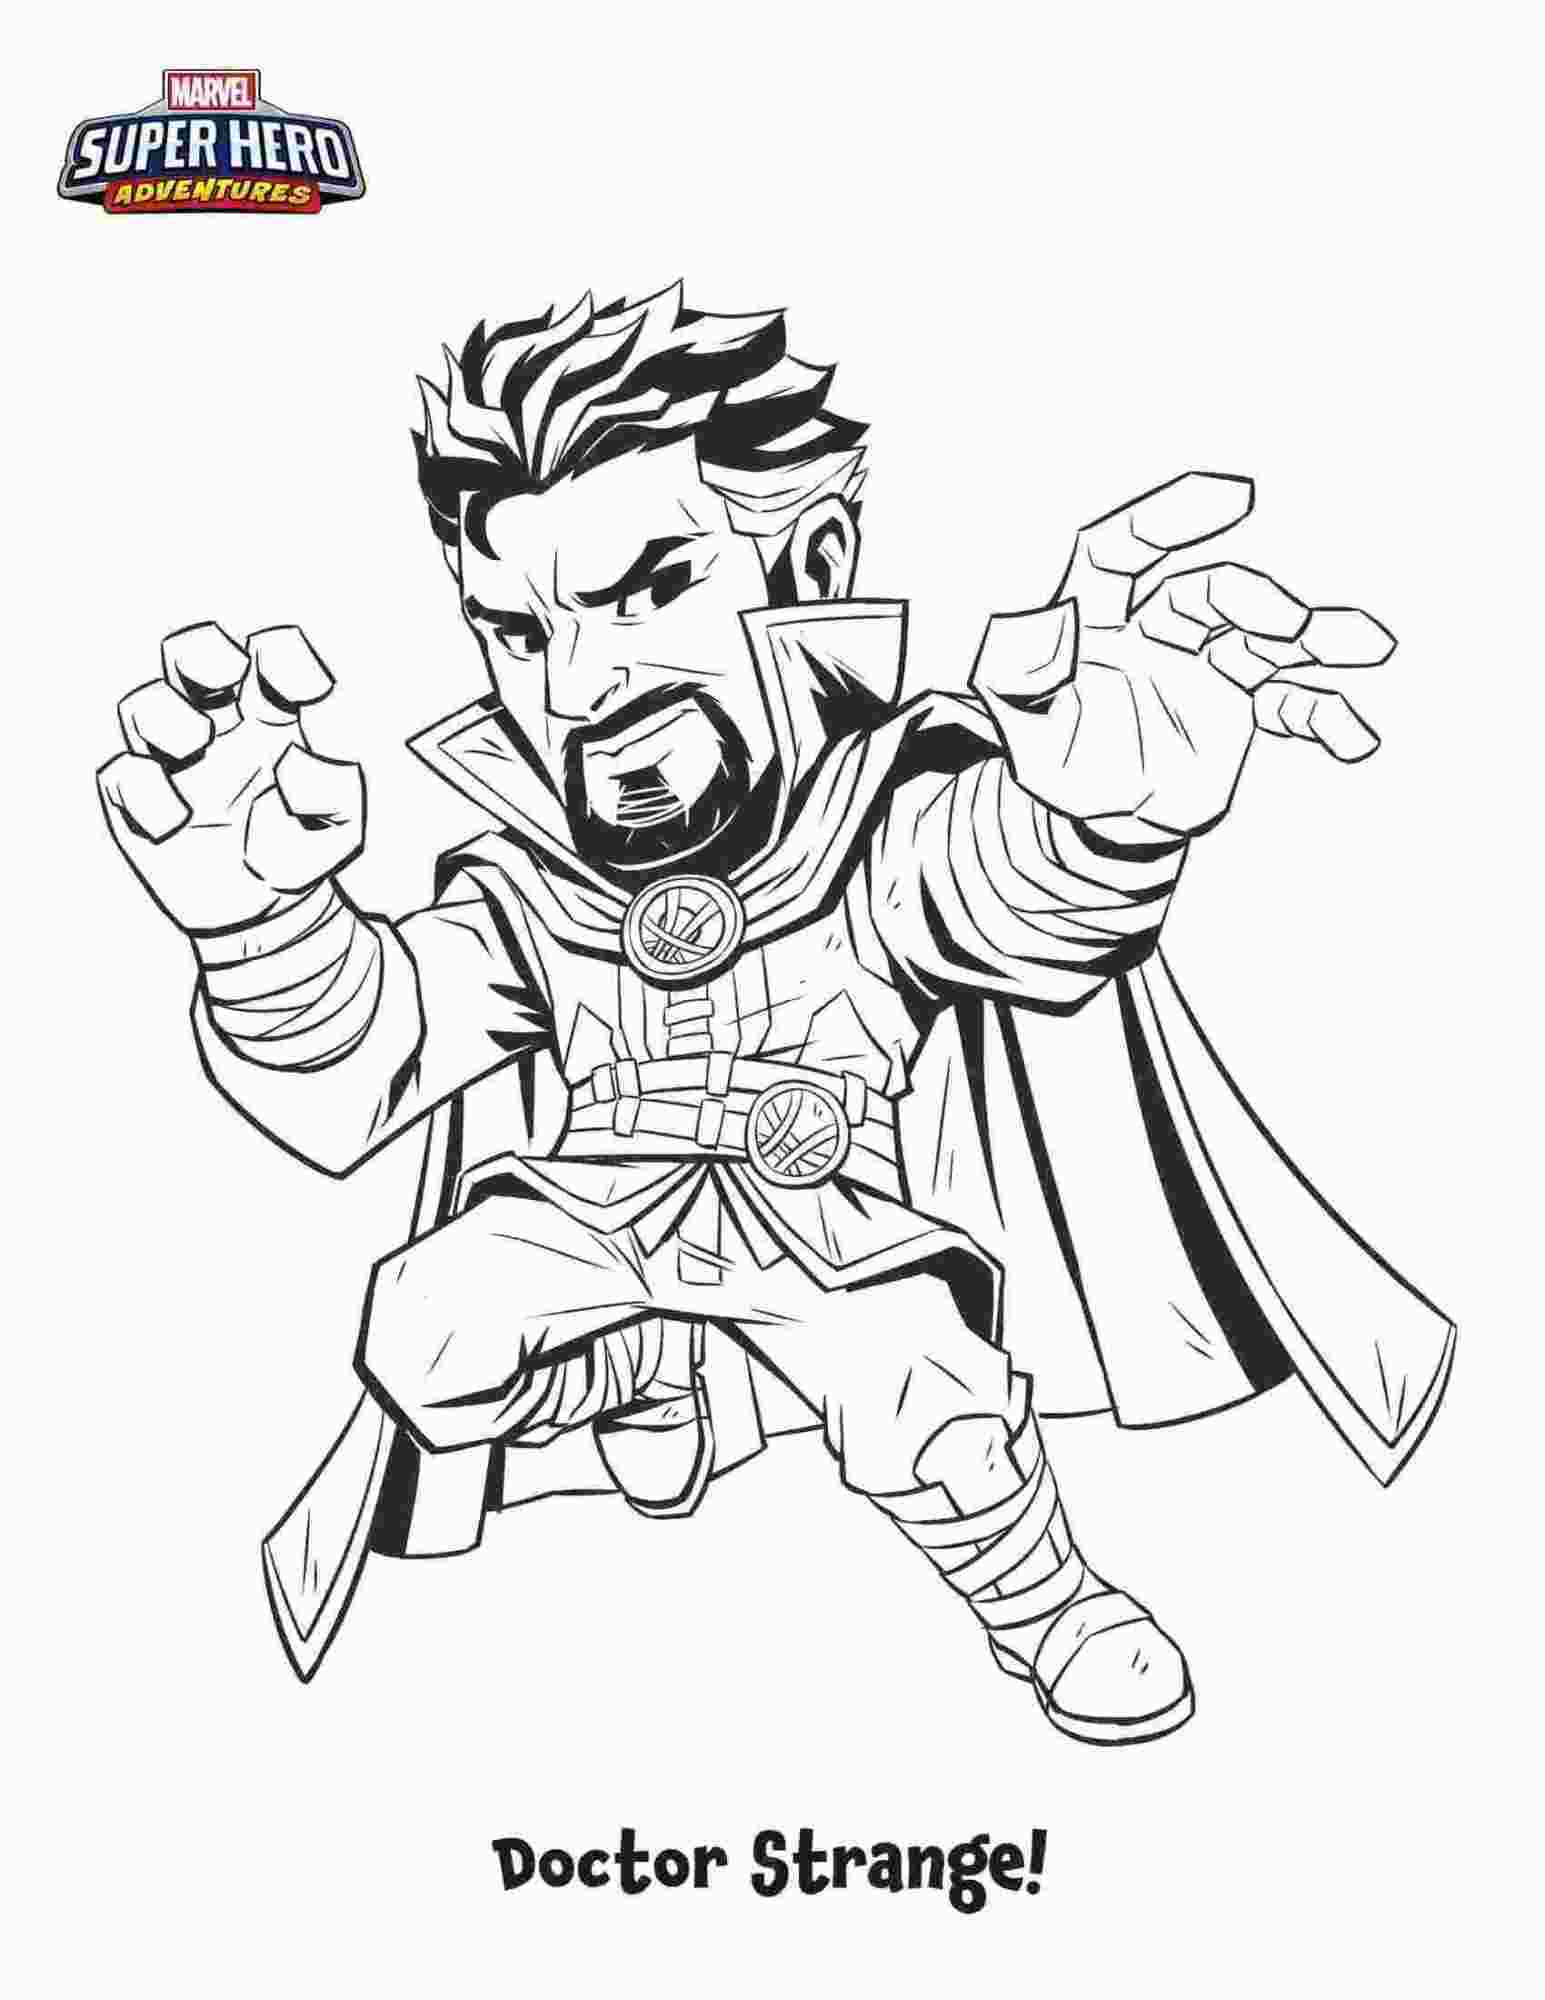 Marvel Superhero Adventures Doctor Strange cartoon Coloring Pages -  Avengers Coloring Pages - Coloring Pages For Kids And Adults